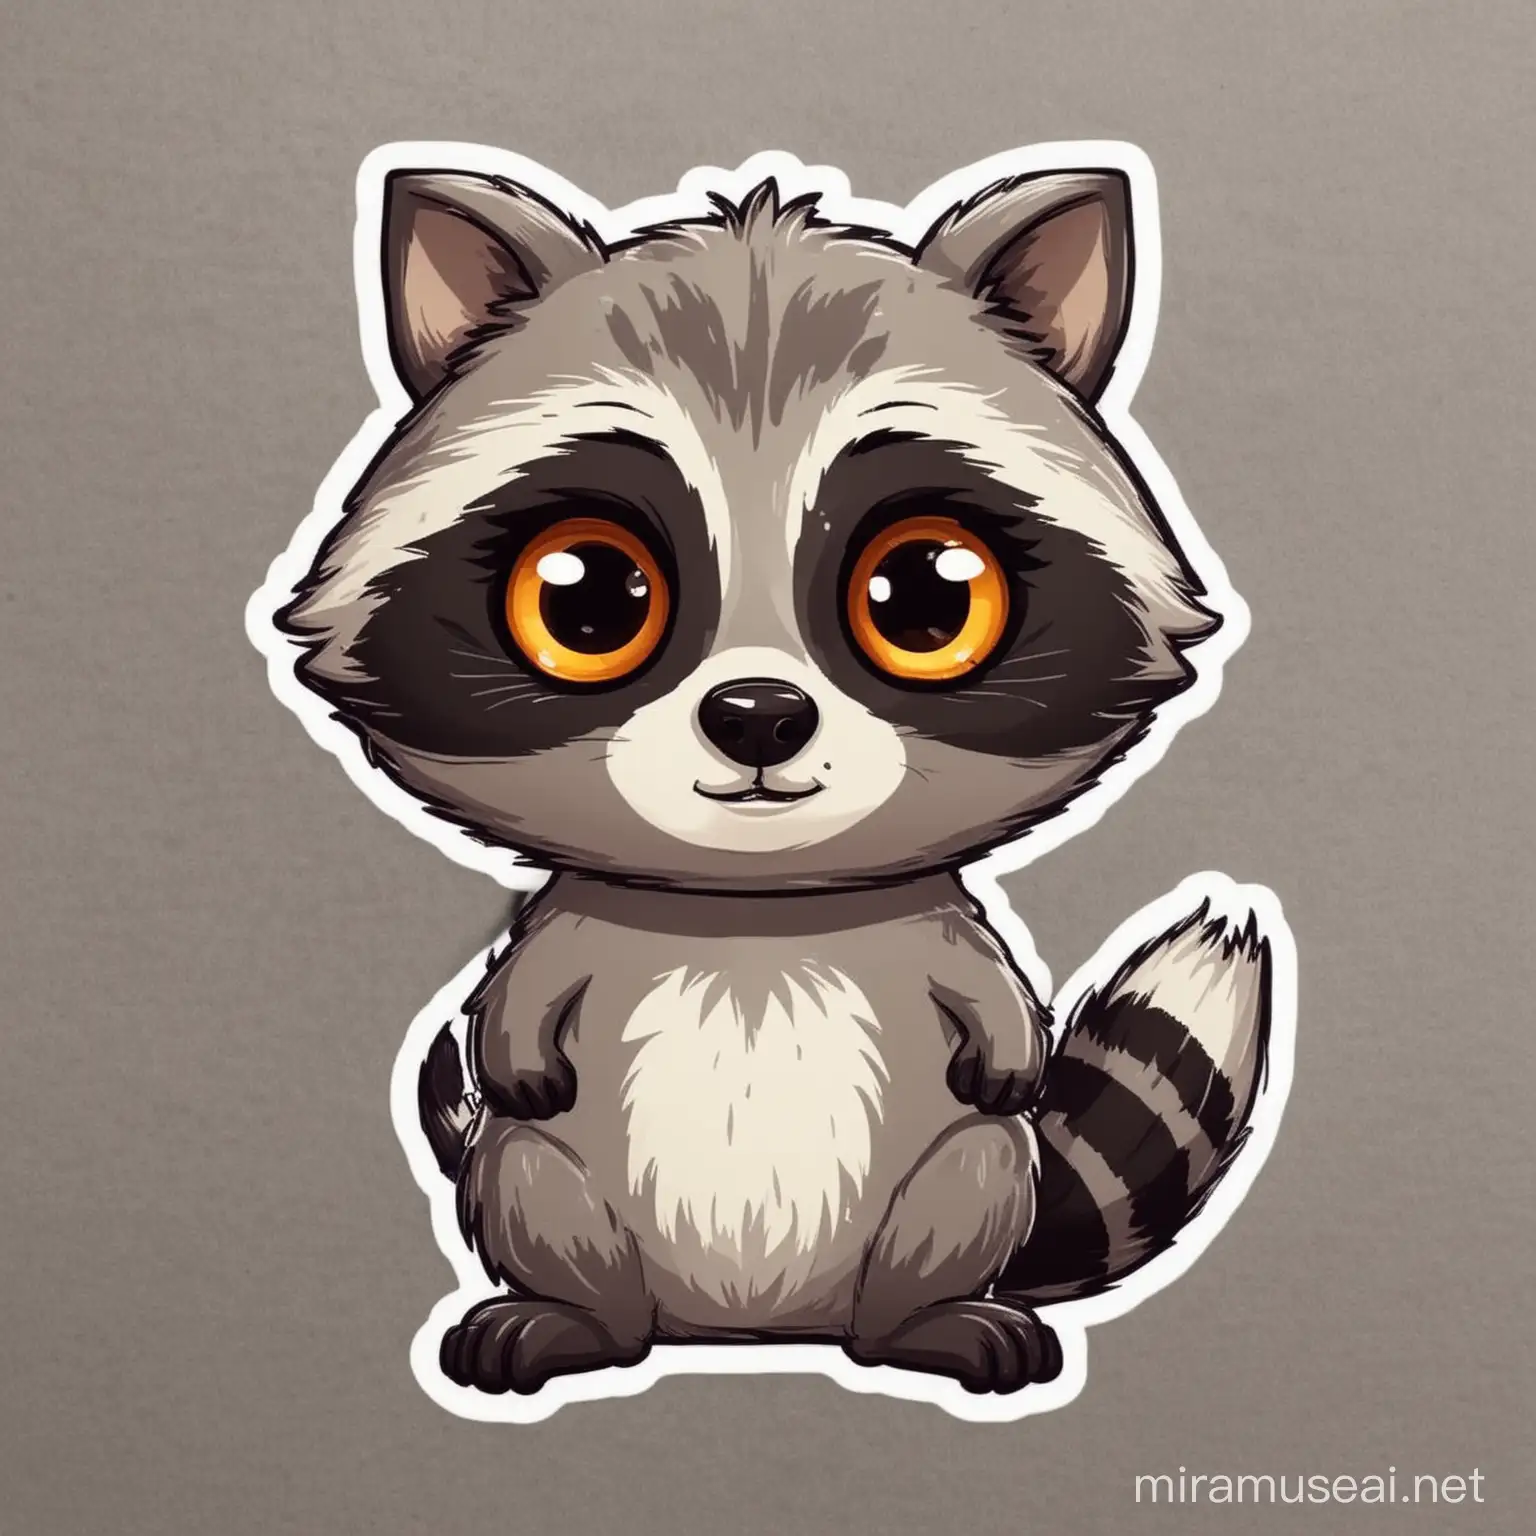 Adorable Cartoon Raccoon Sticker with Expressive Eyes